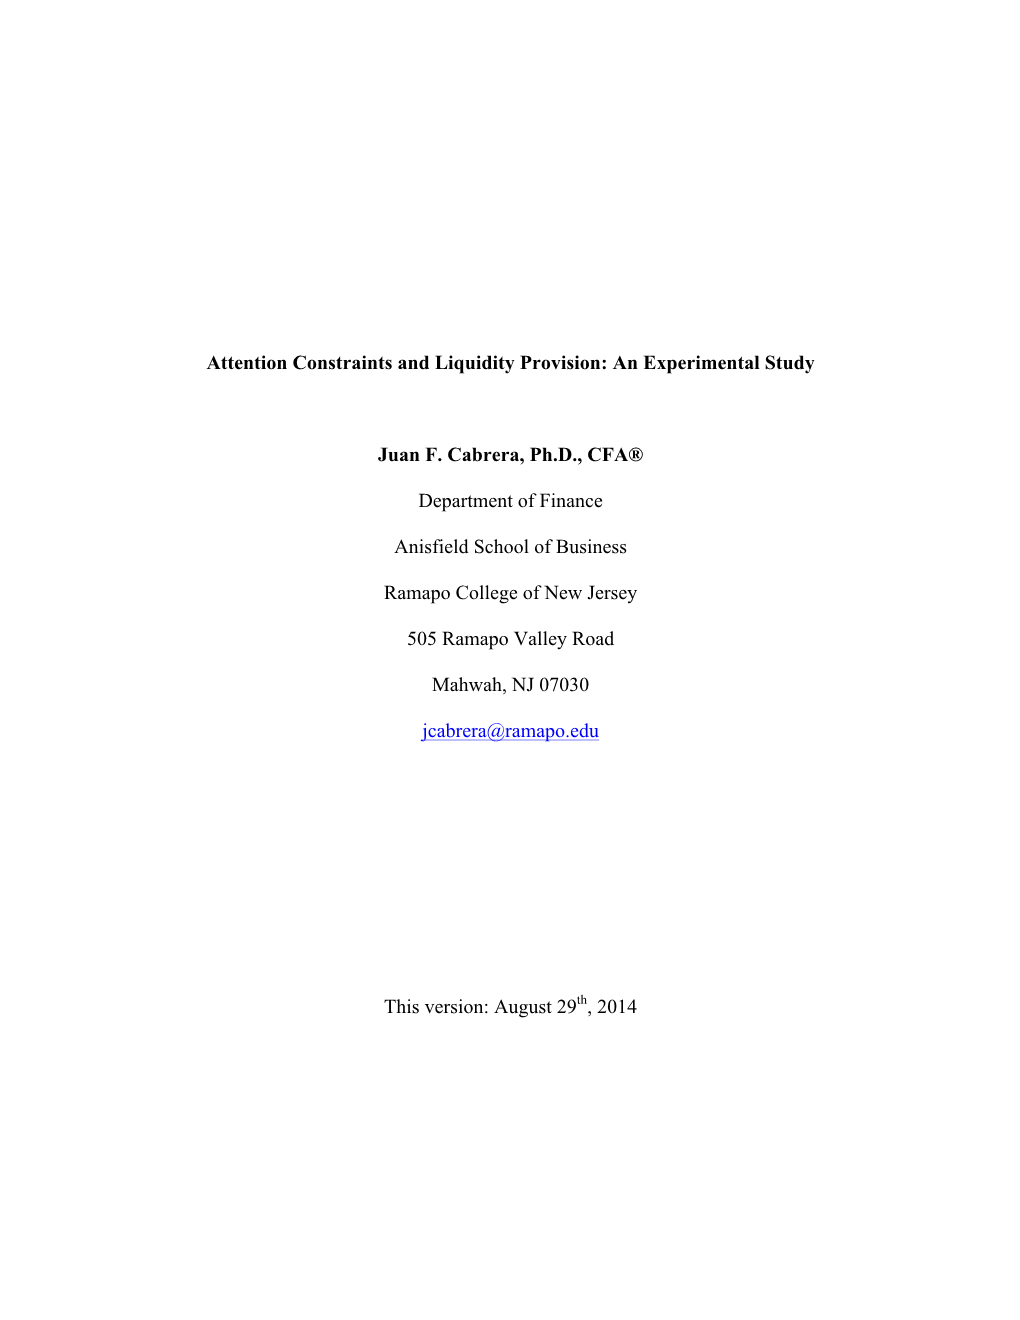 Attention Constraints and Liquidity Provision: an Experimental Study